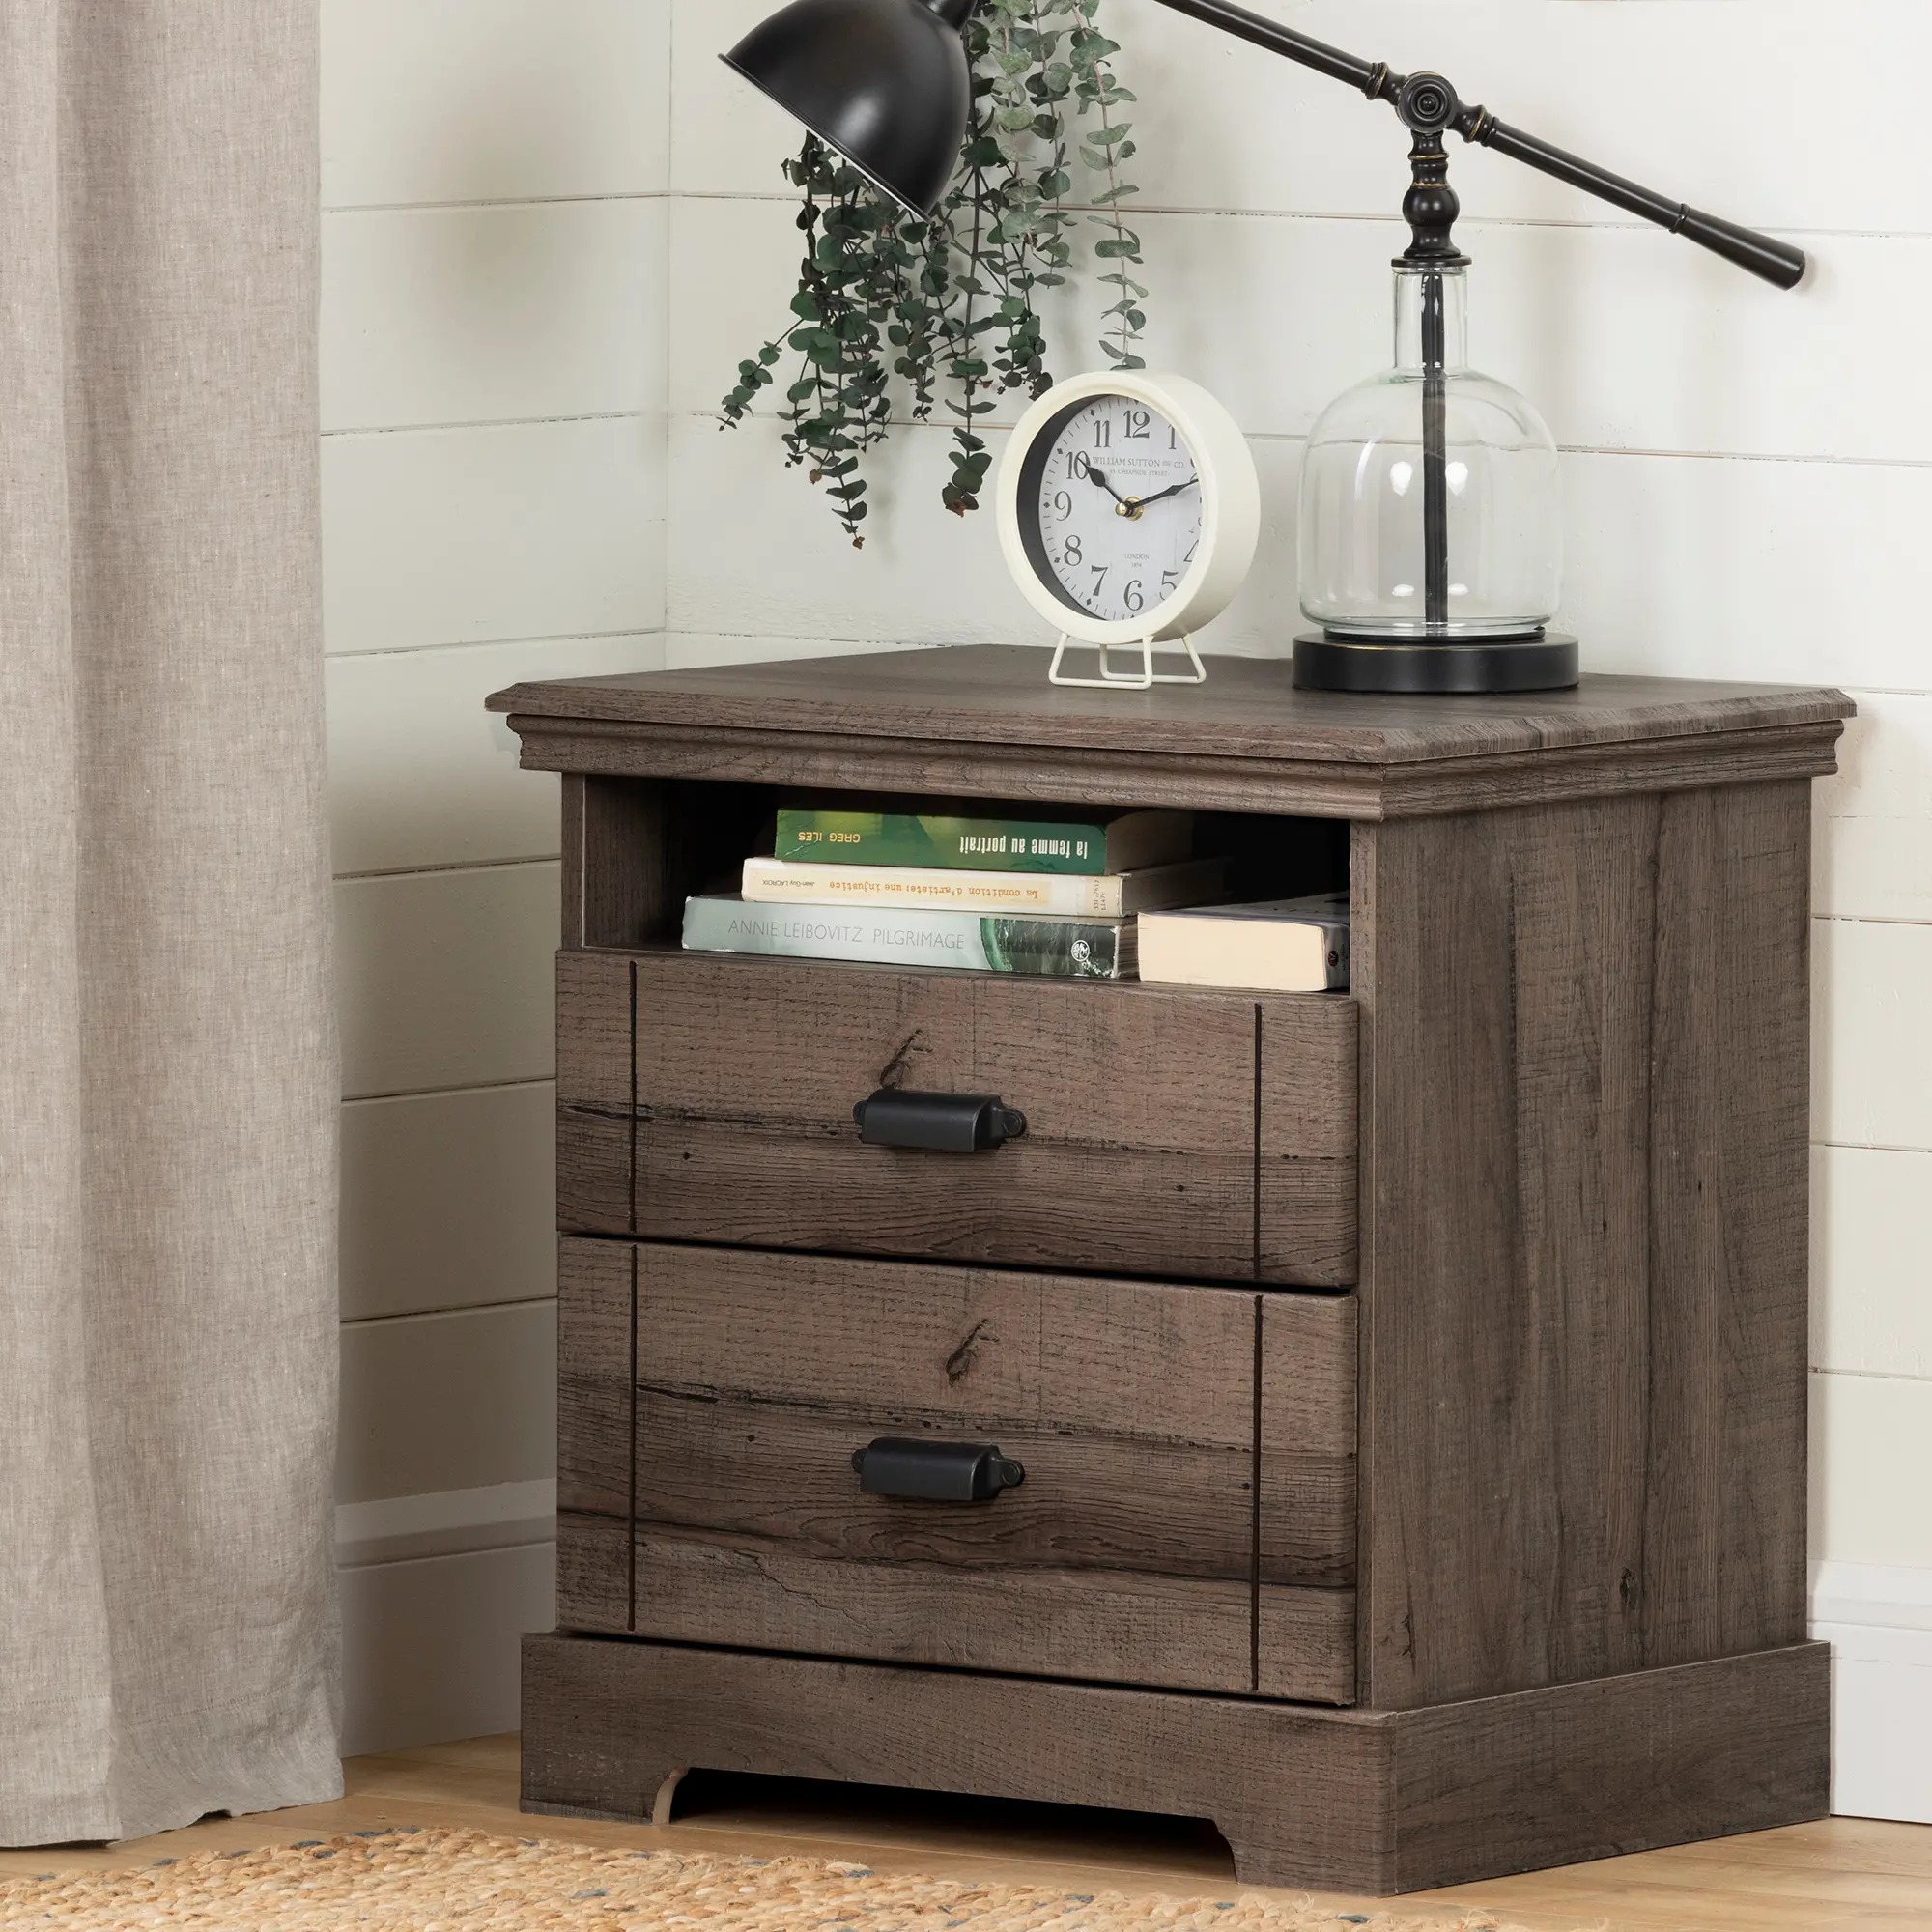 11907 Classic Cottage Oak Brown Nightstand - South Shore sku 11907